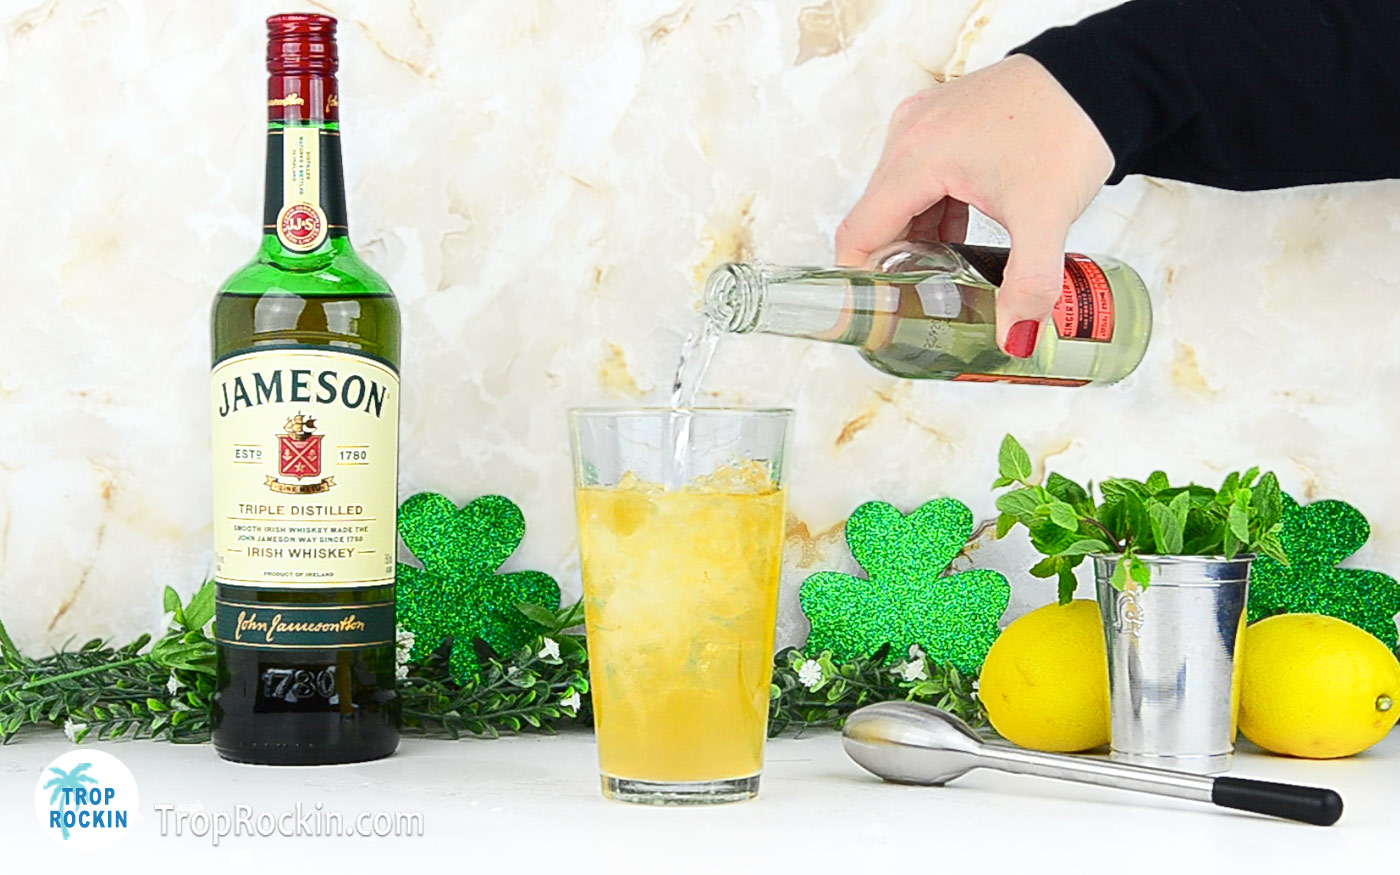 Pouring ginger beer into cocktail glass with lemonade and irish whiskey.